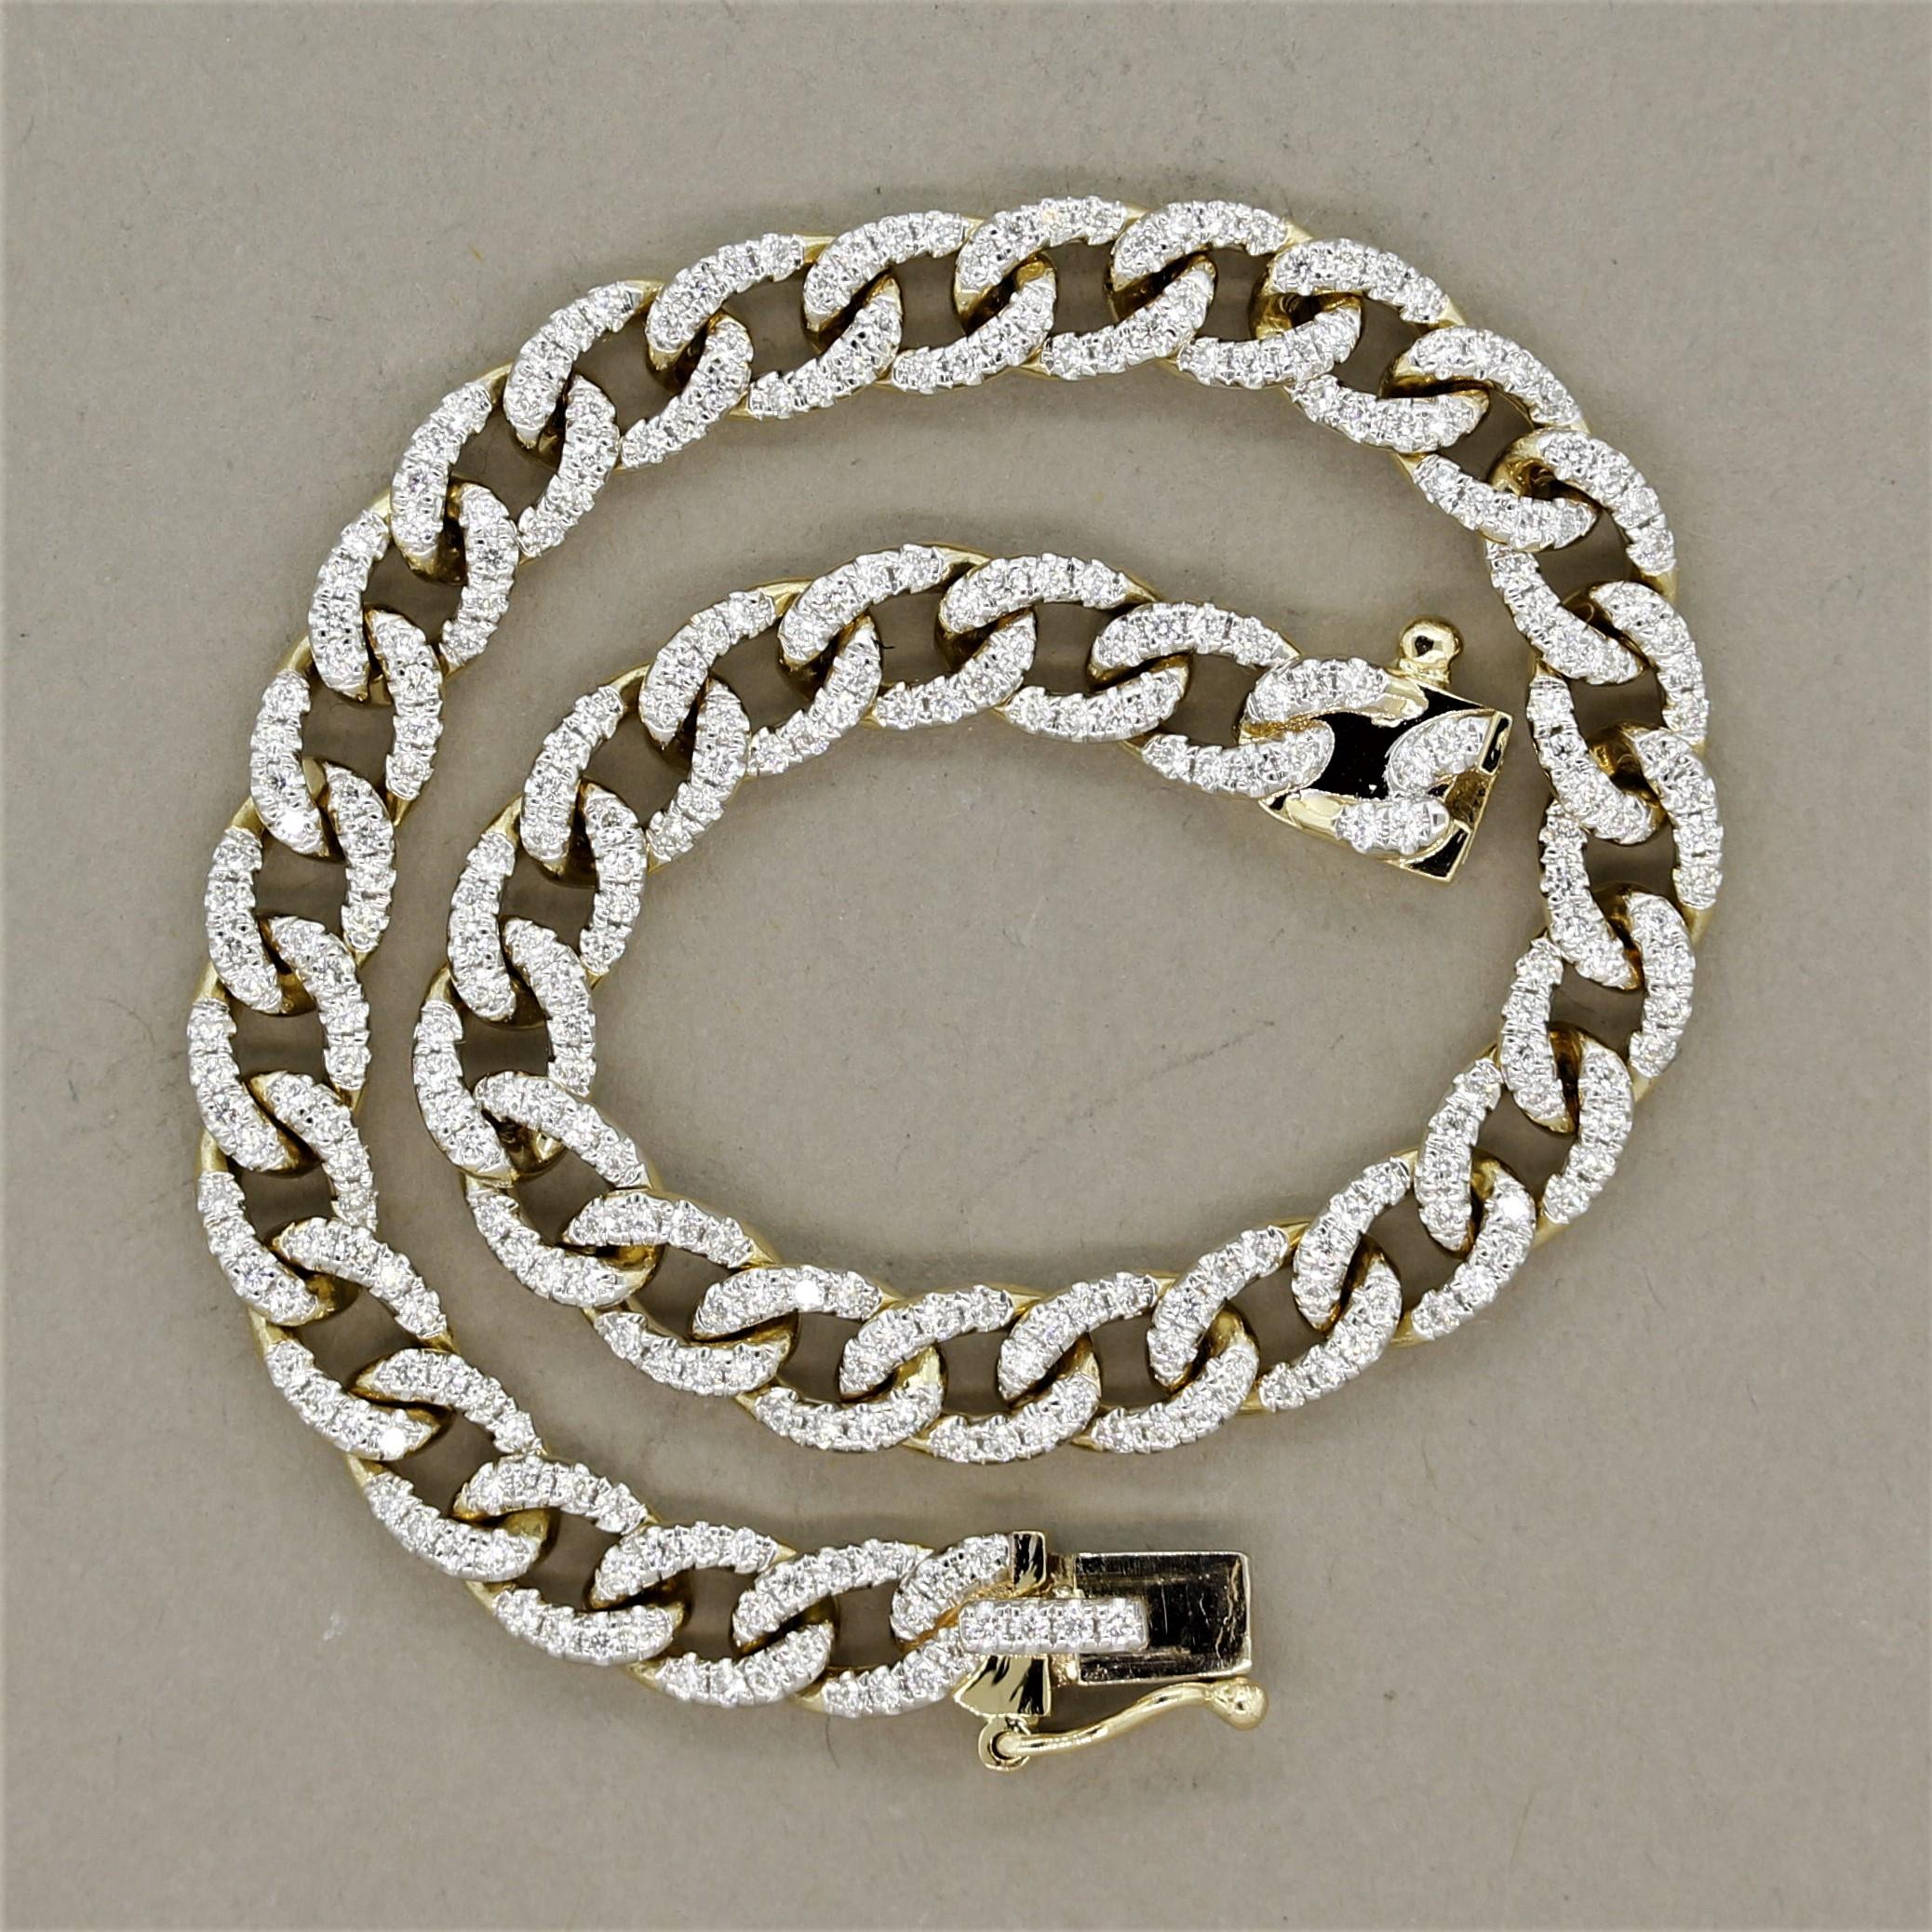 A classic curb link bracelet pave set with 1.90 carats of round brilliant cut diamonds. The bracelet measures 7 inches long and 0.20 inches wide allowing it to be worn on its own or stacked with other bracelets. Hand-fabricated in 14k yellow gold